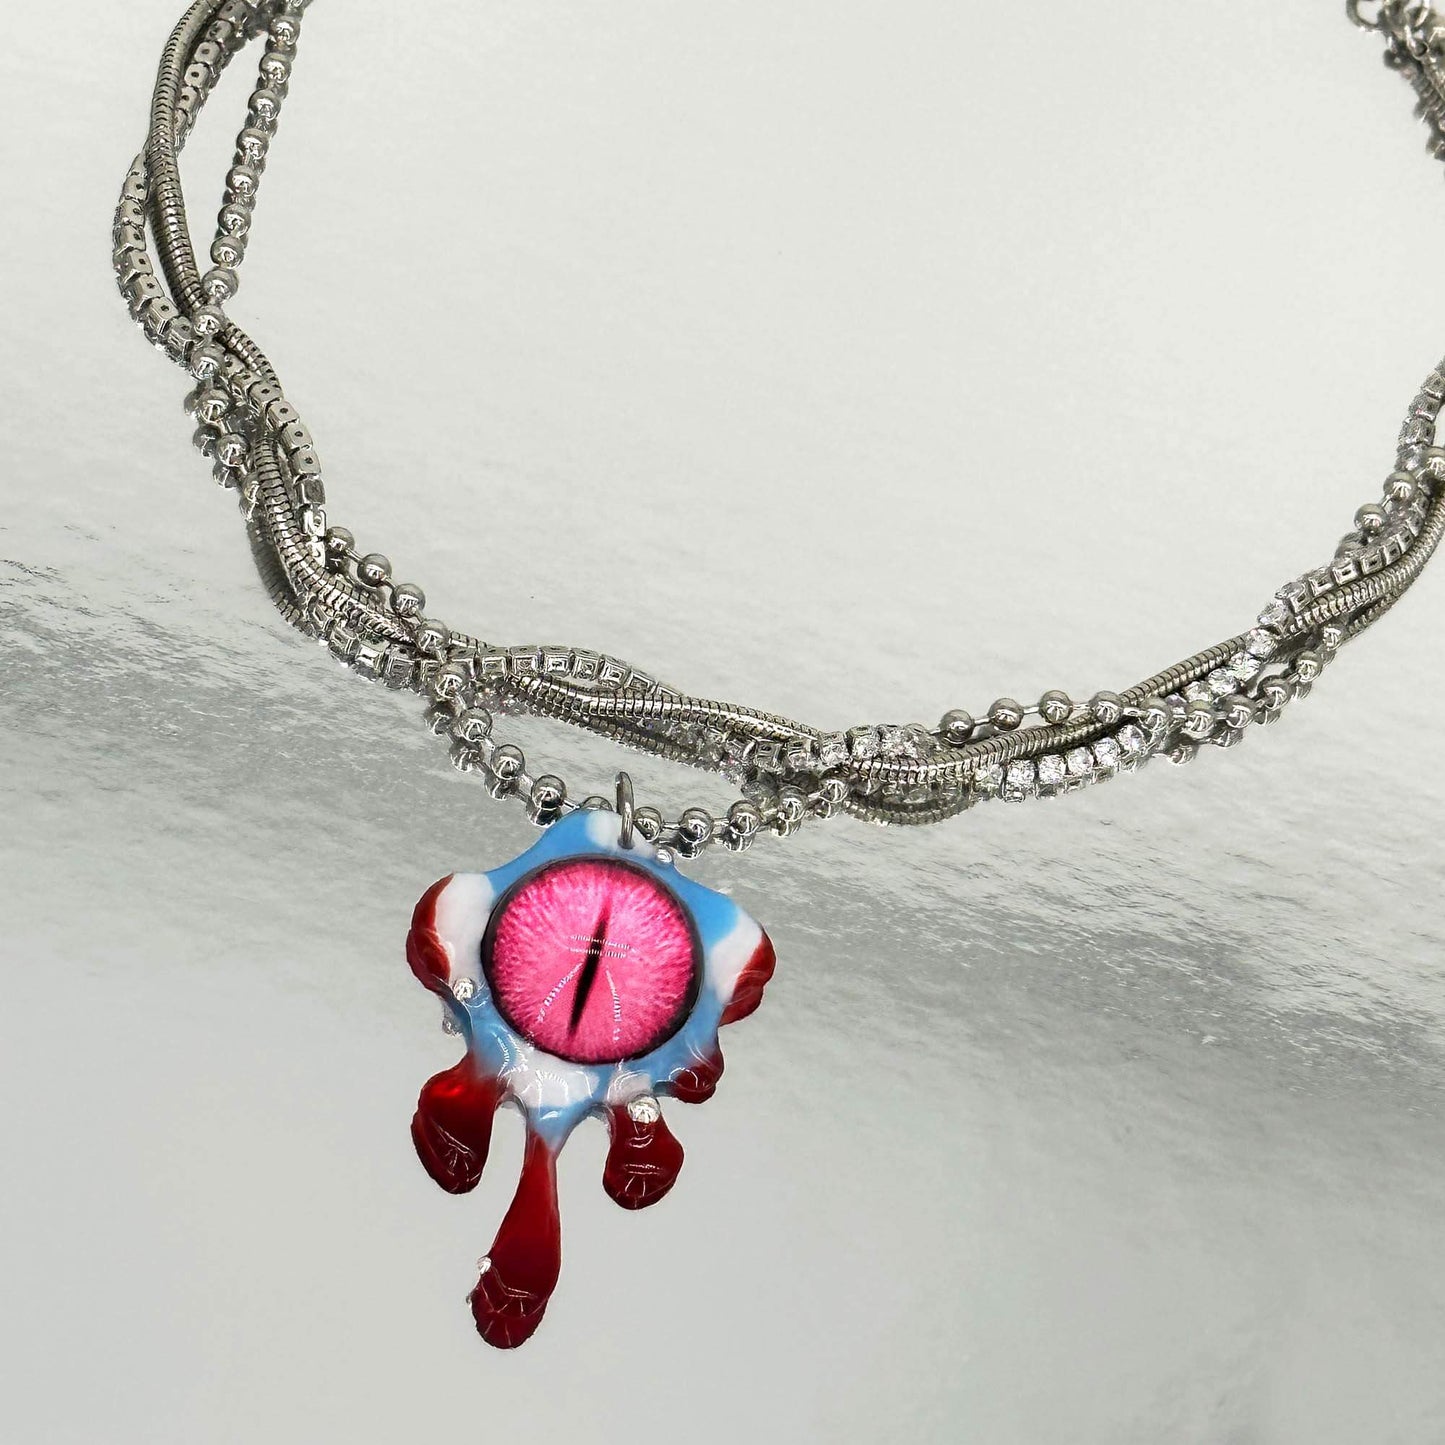 Handmade necklace made of resin with pink eye elements